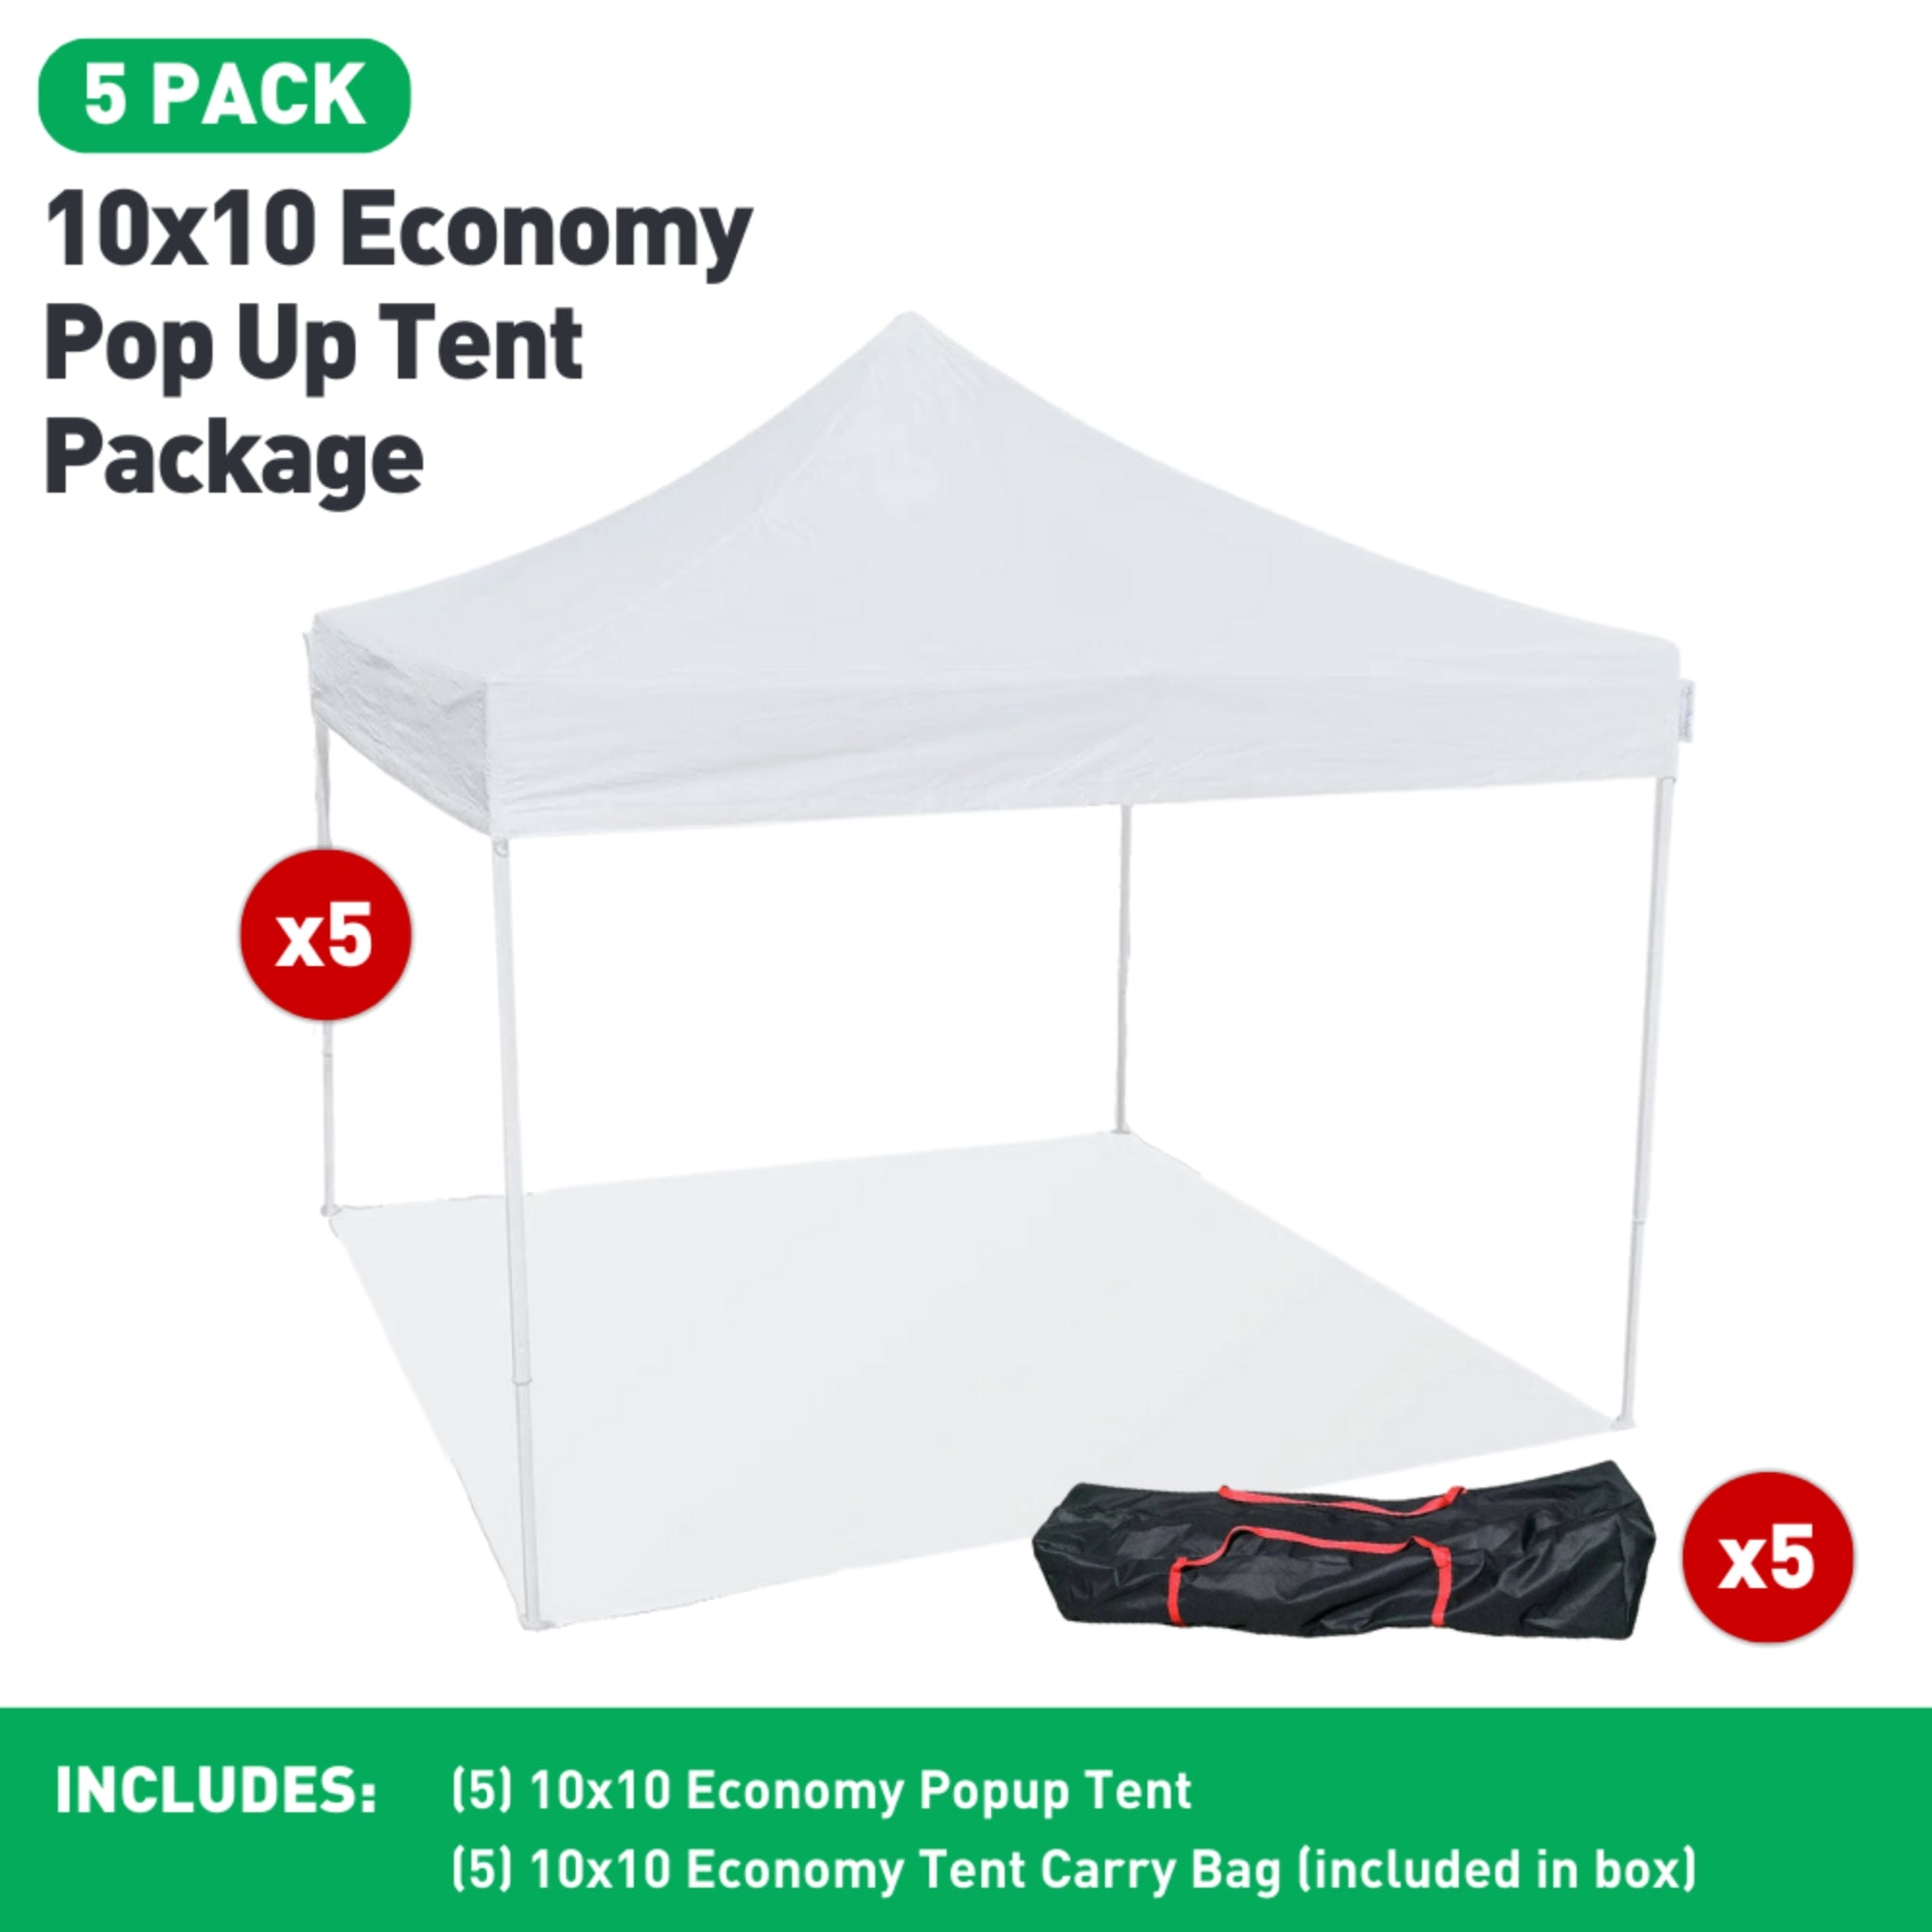 Economy Pop Up Tent Package Deal - 5 Pack - HullaBalloo Sales